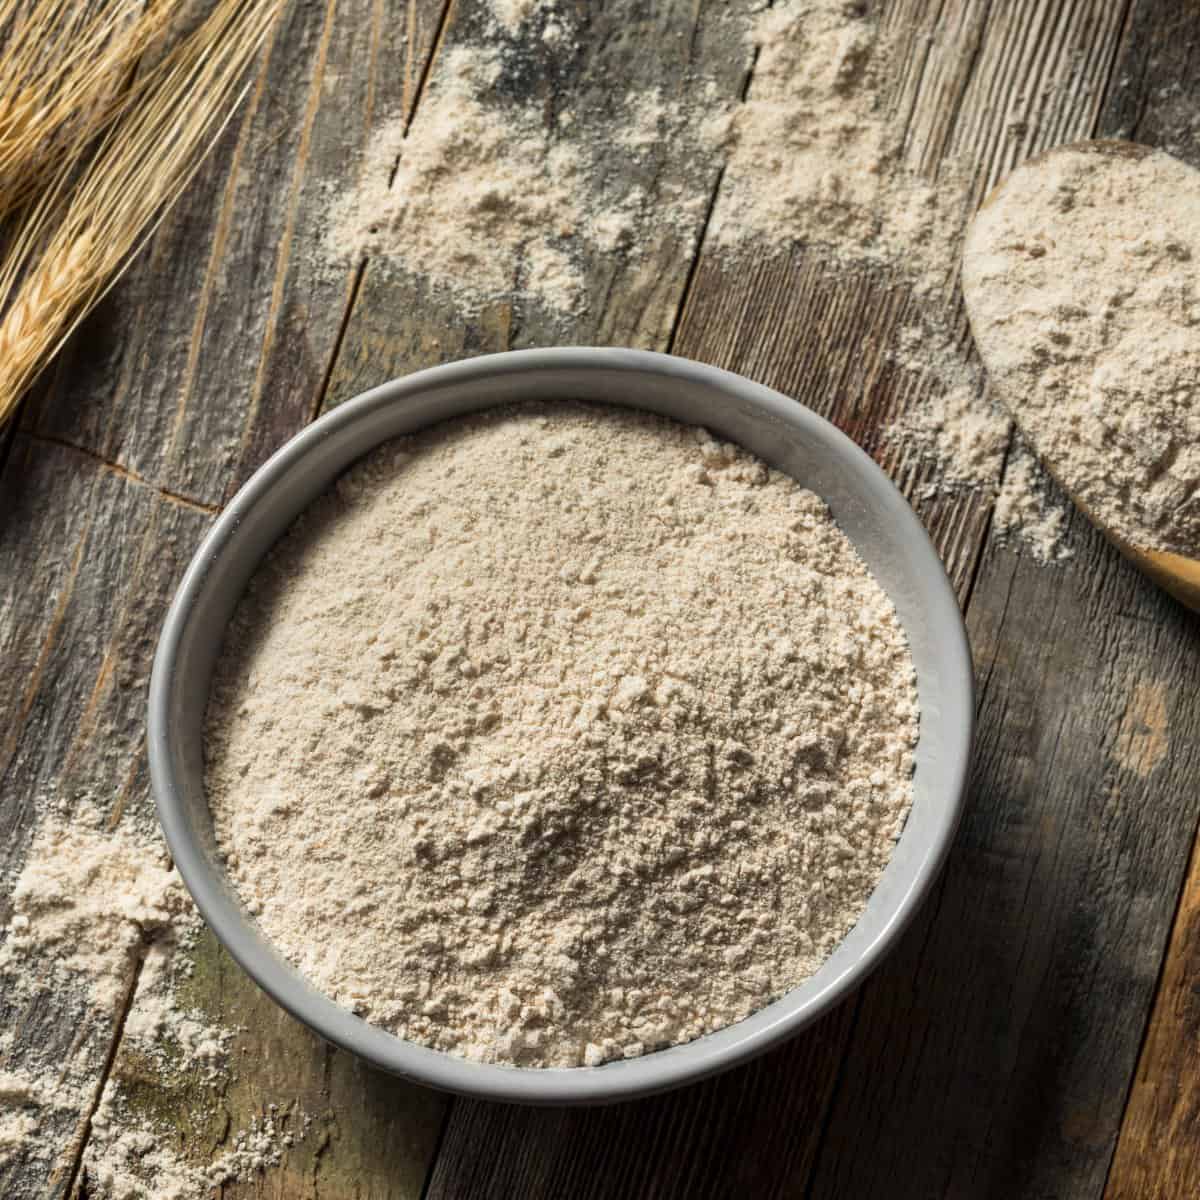 What is whole wheat flour